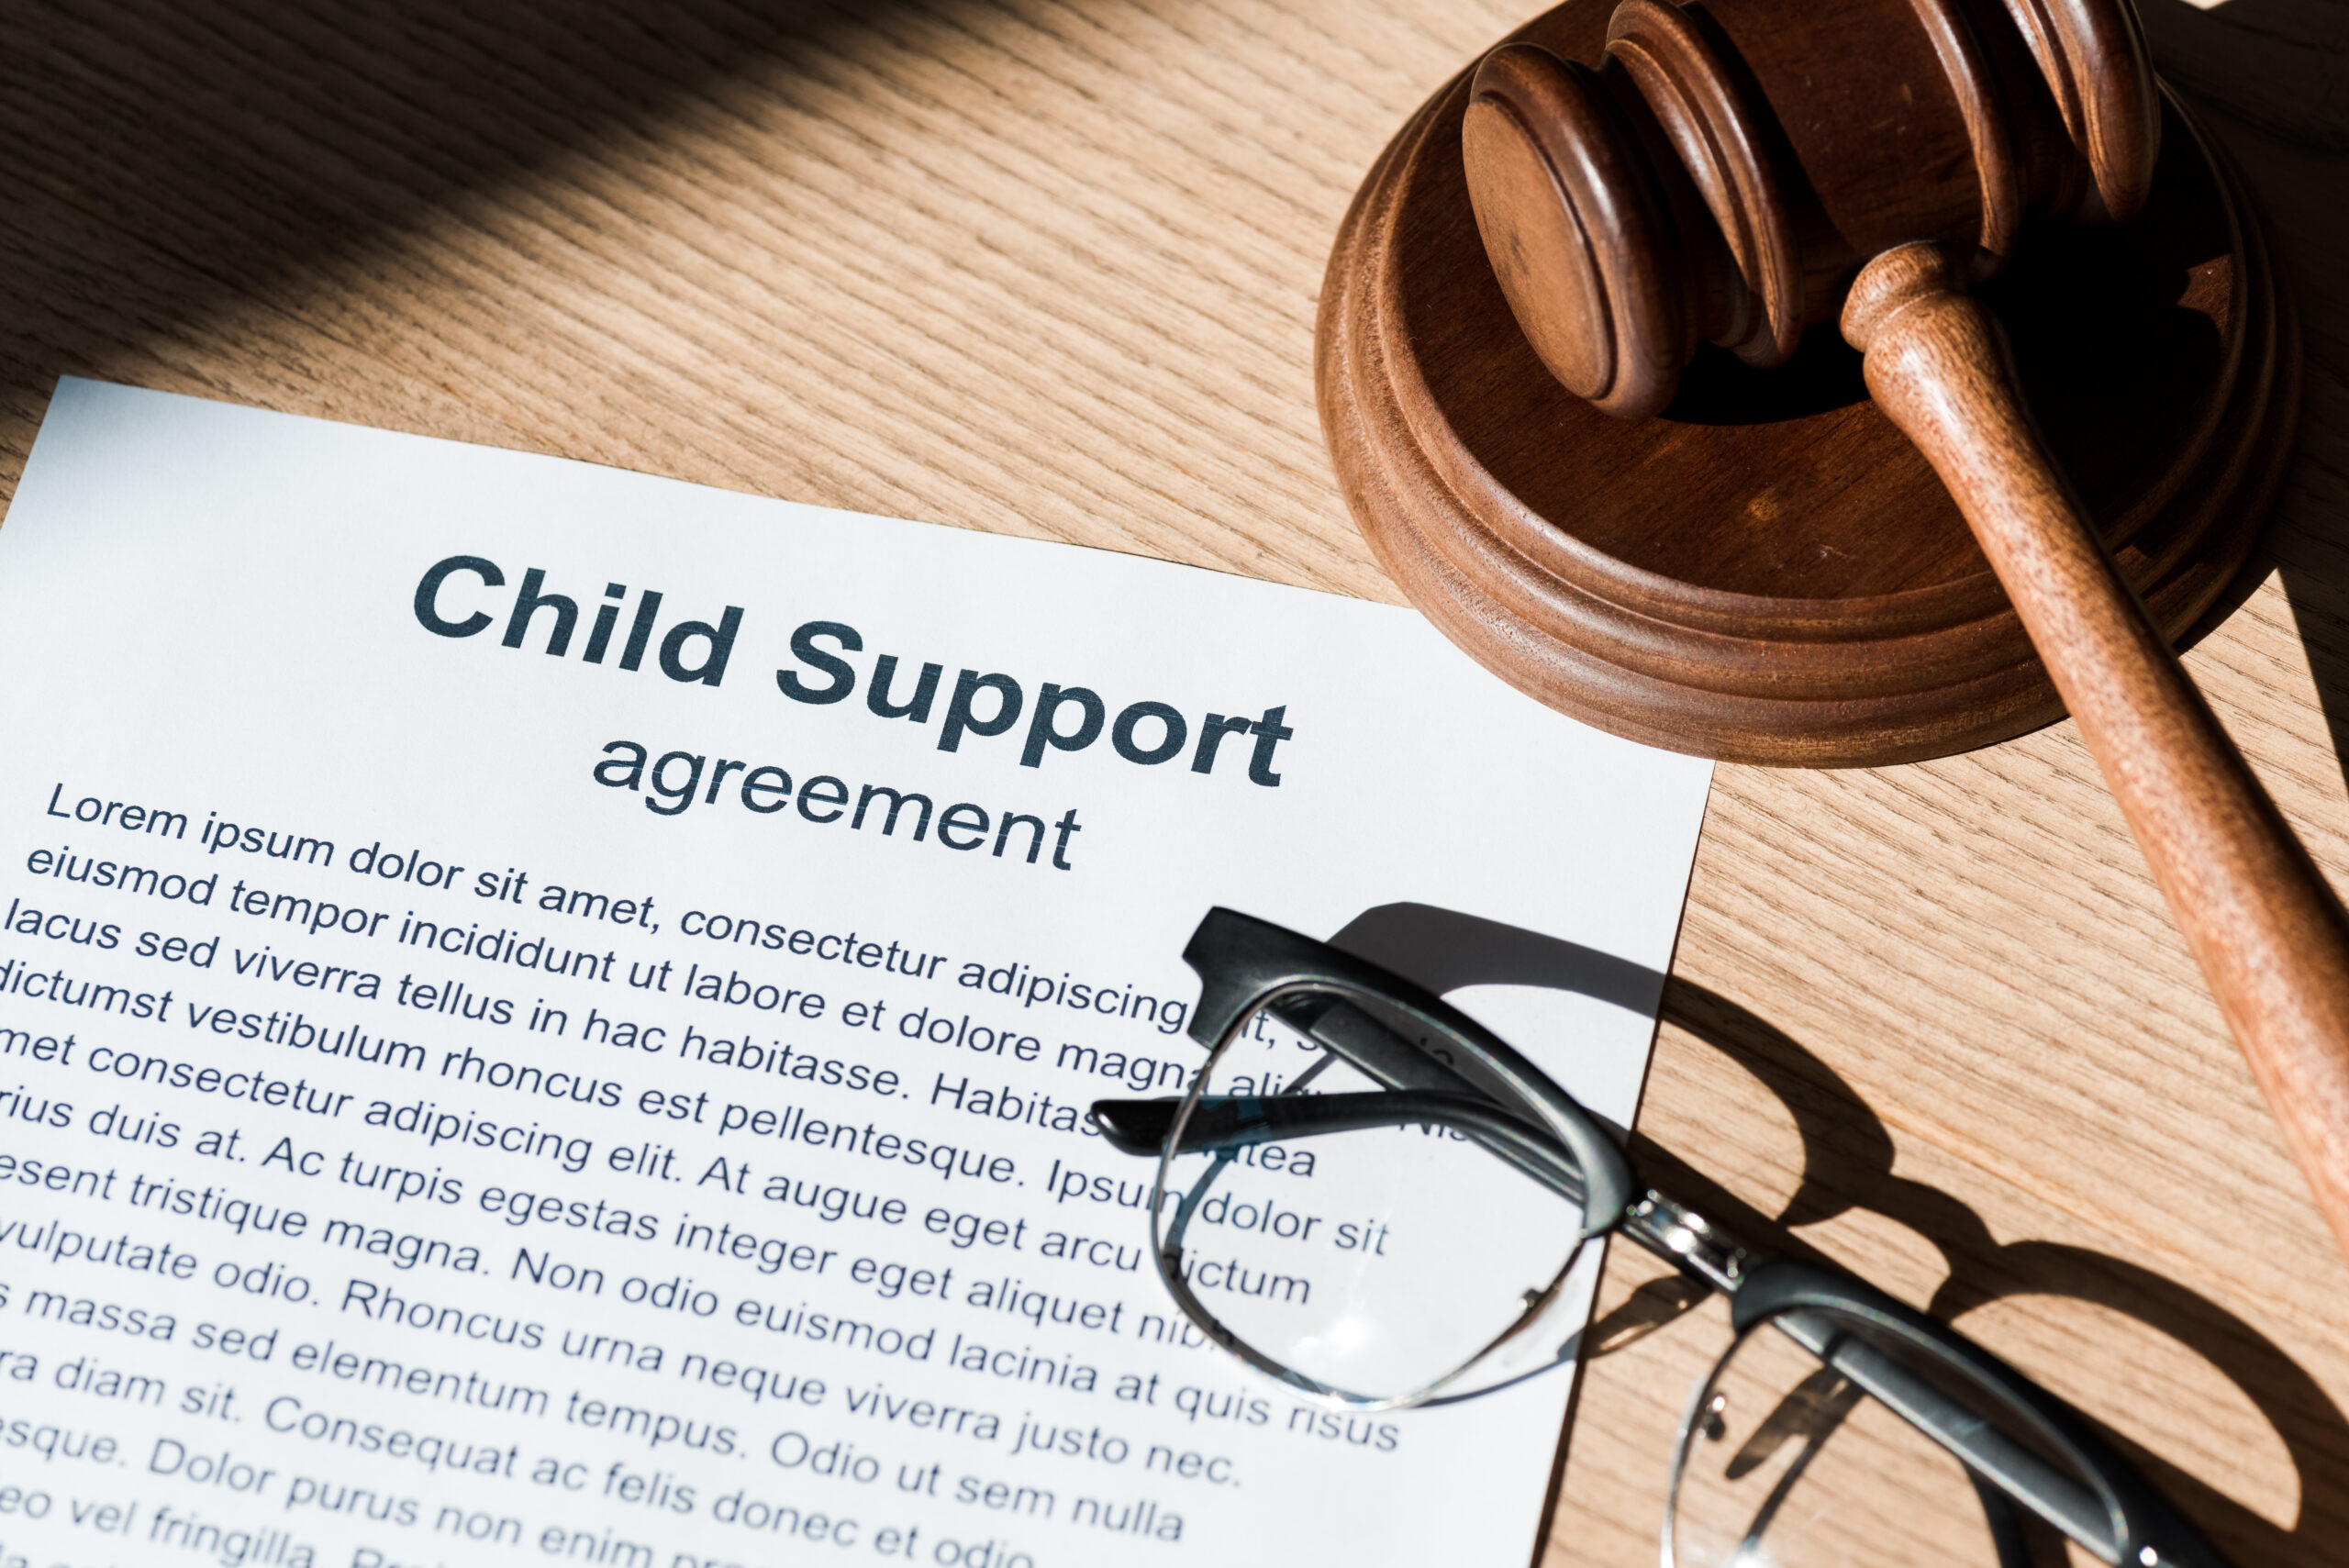 How to modify child support